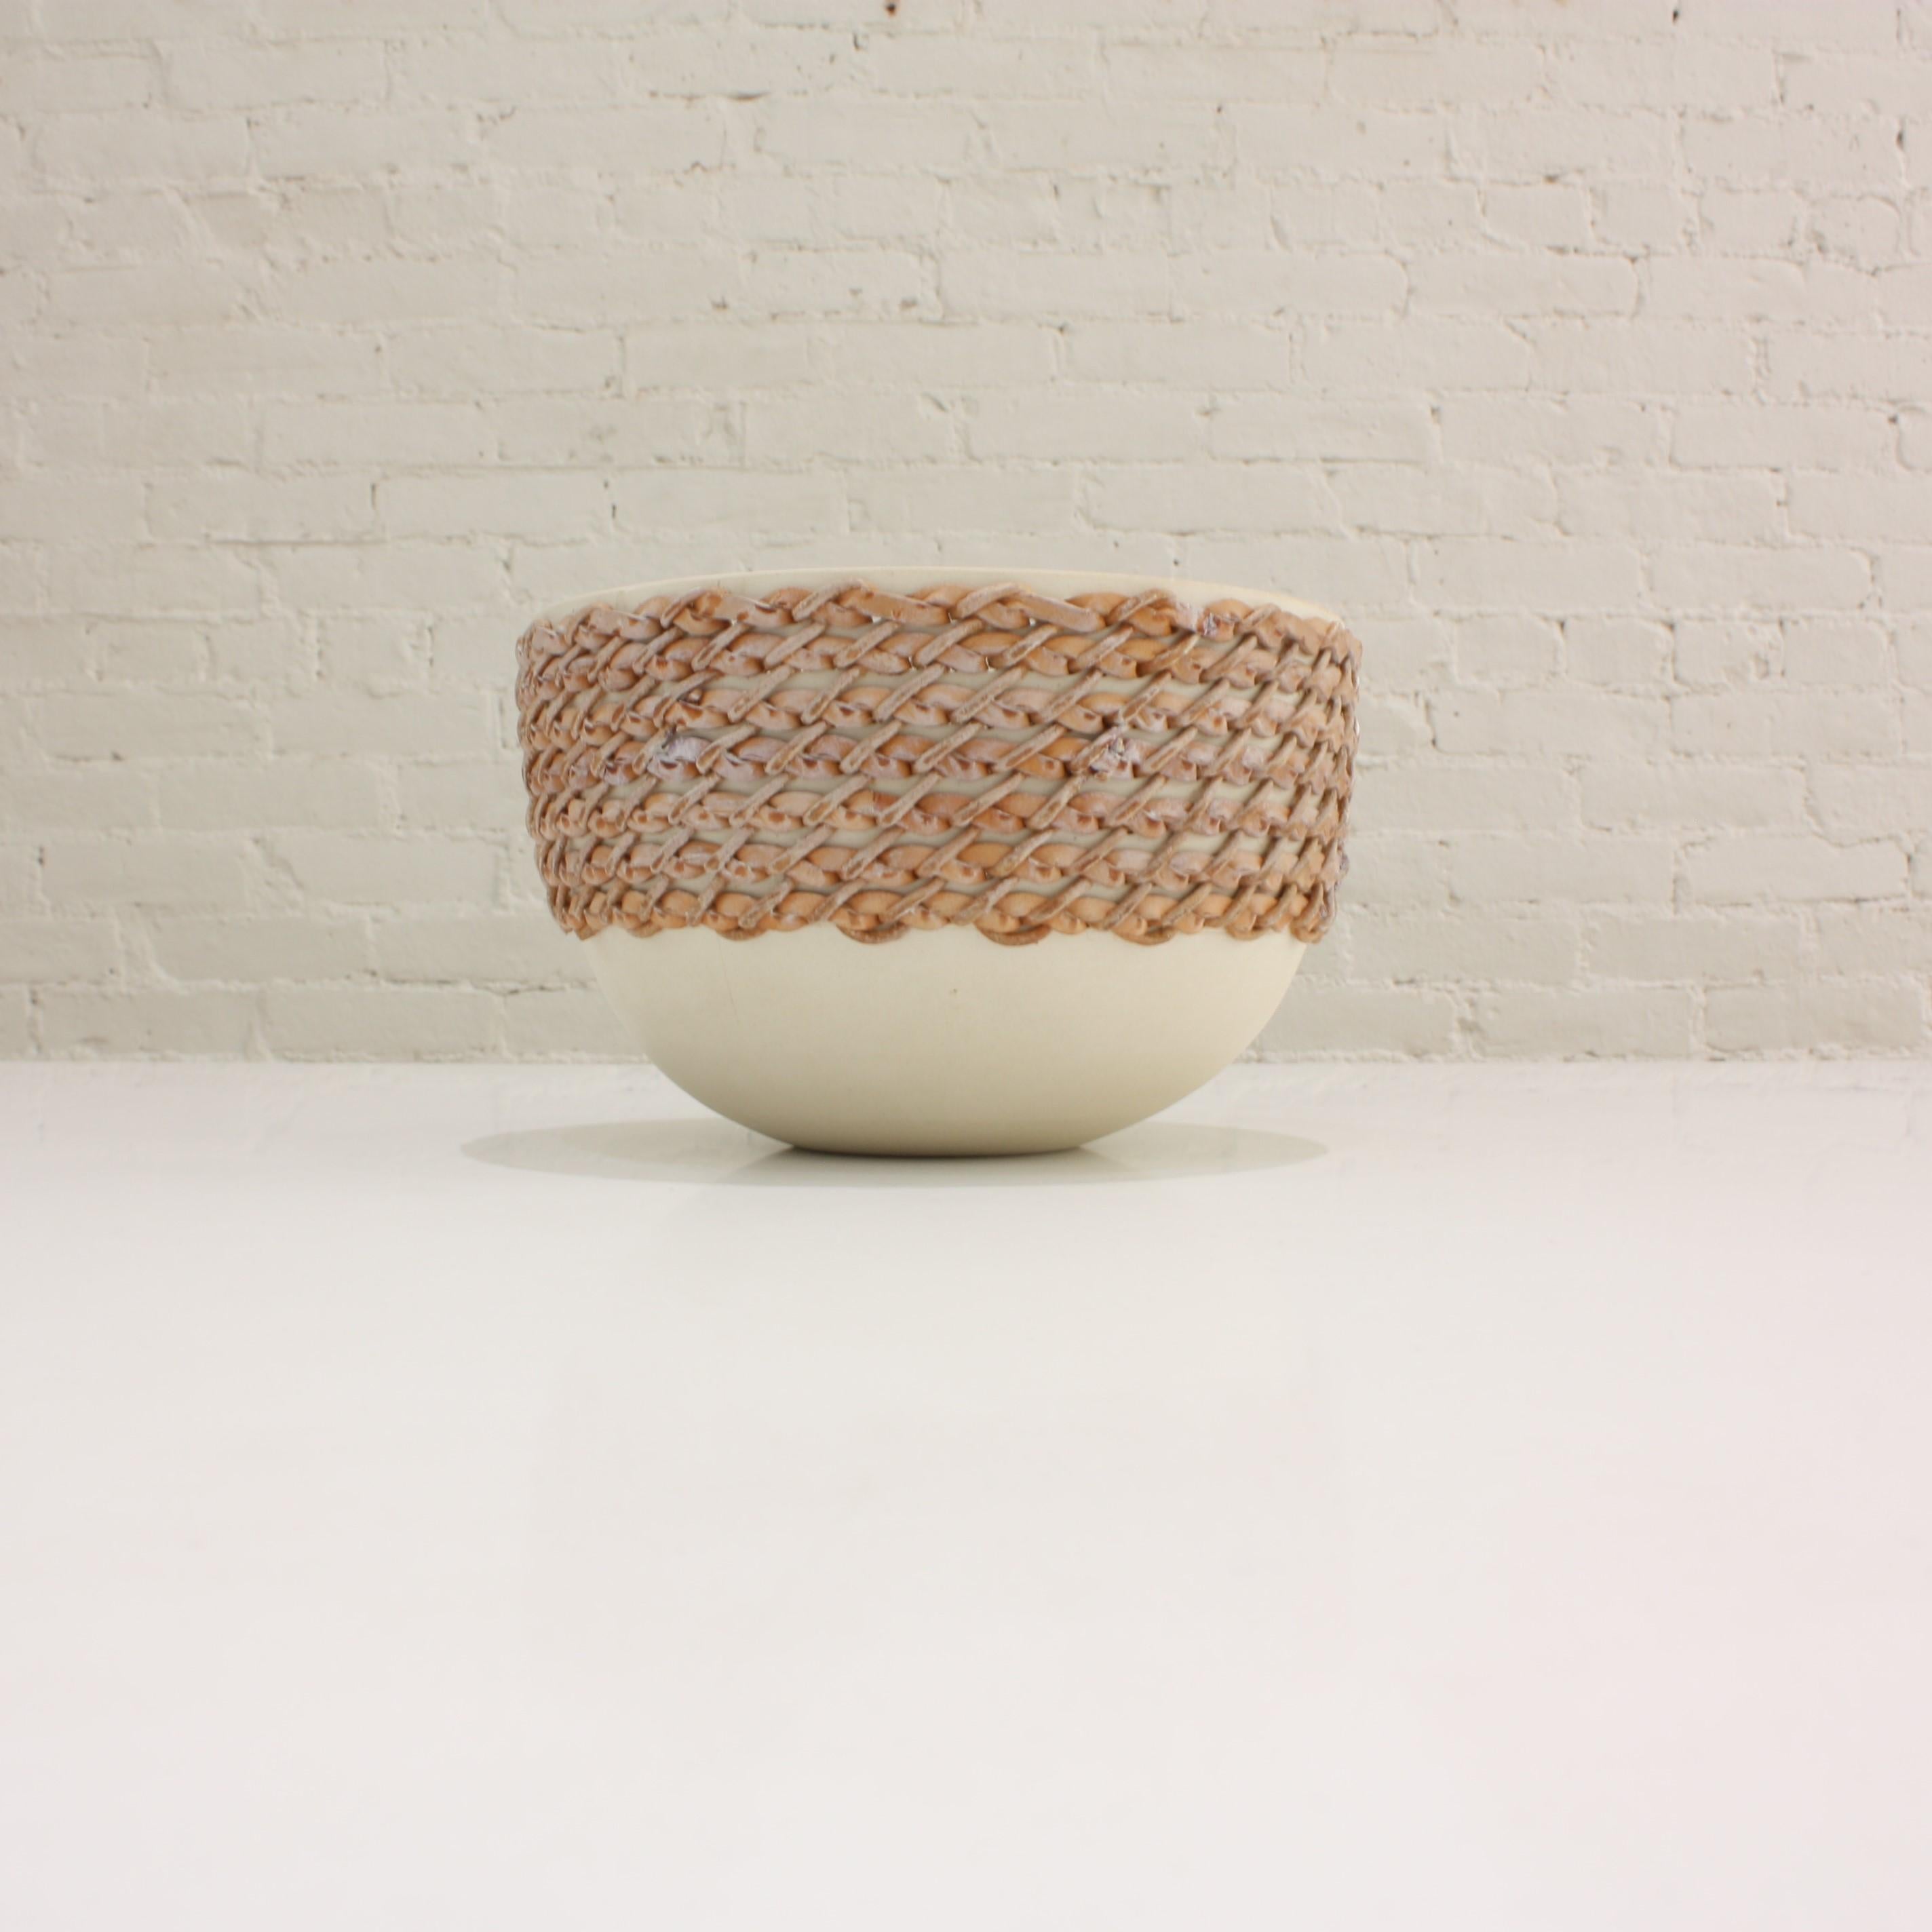 White chamotte stoneware bowl, wheel-turned, pierced and hand-embroidered with leather.

An homage to French Haute Couture, this embroidered ceramic bowl combines the artist's experience in the fashion world (Dior, Givenchy) with his passion and